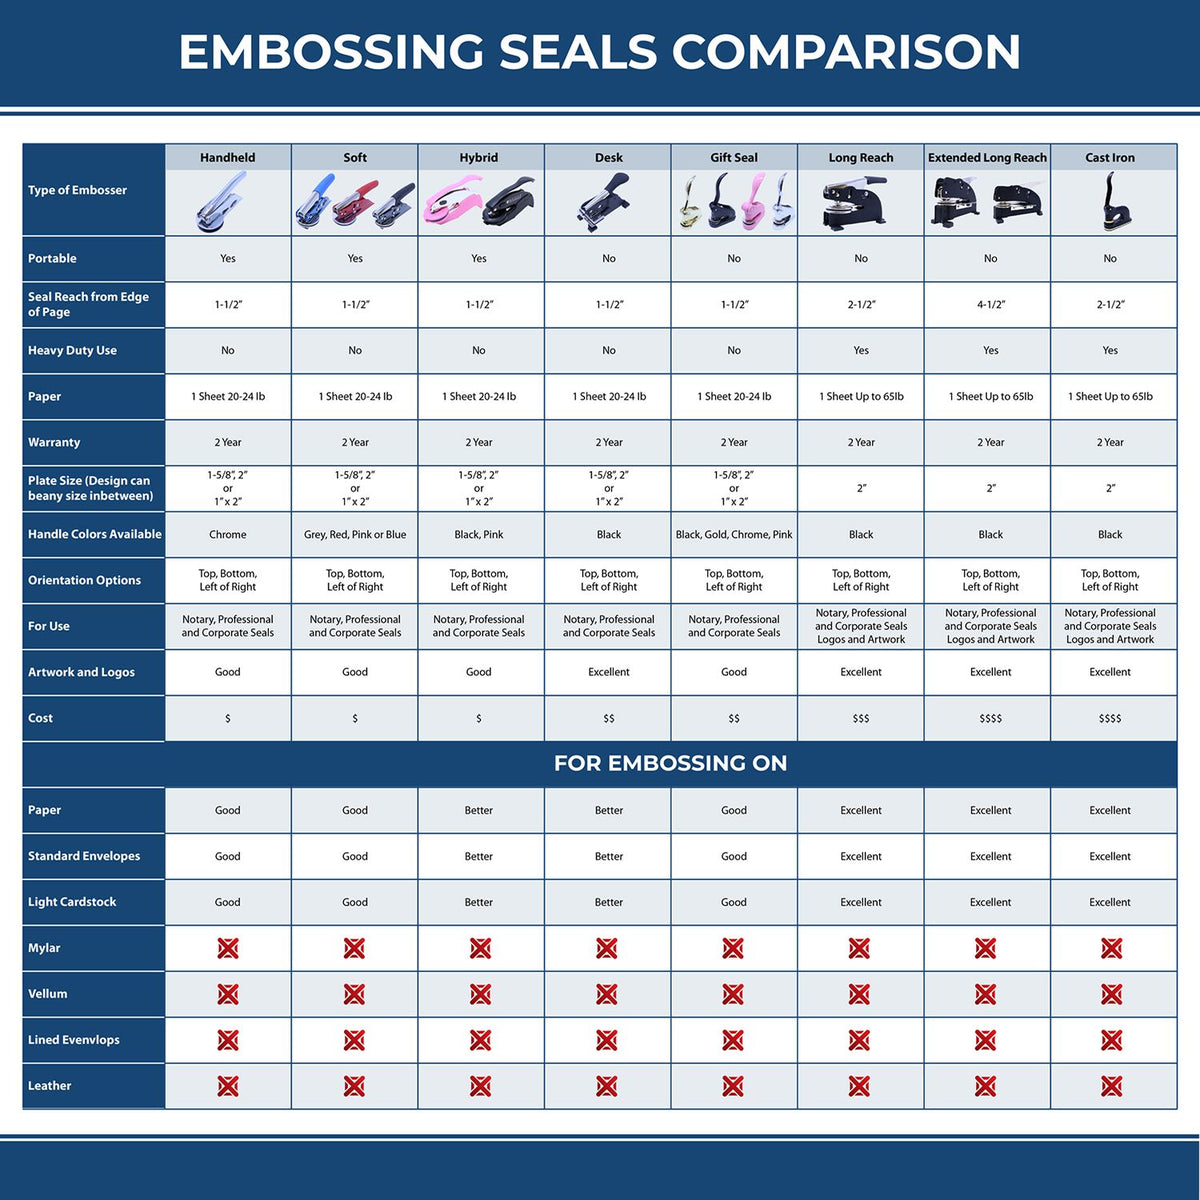 A comparison chart for the different types of mount models available for the State of Guam Long Reach Architectural Embossing Seal.